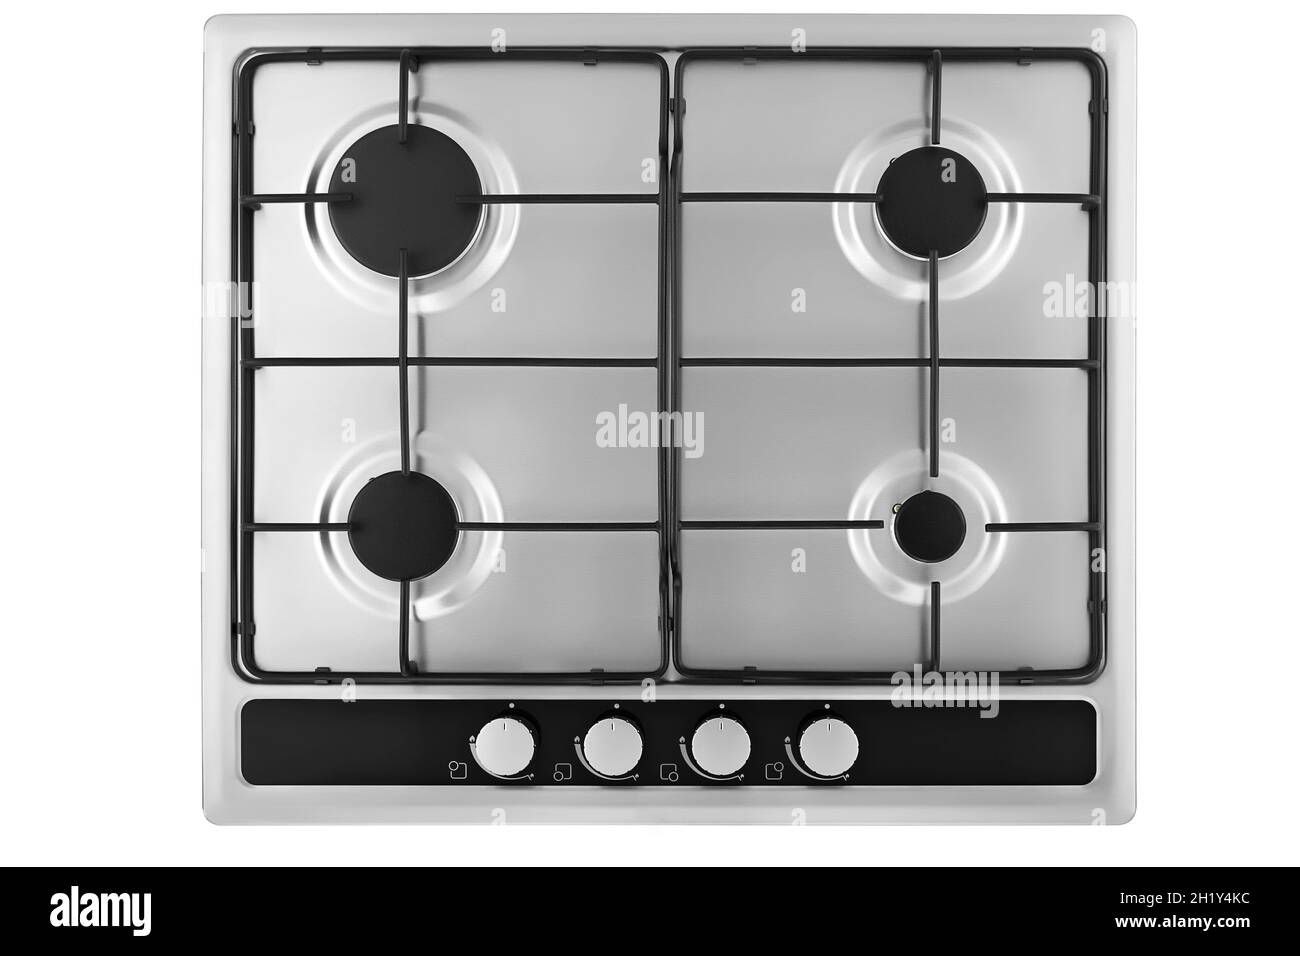 Electric stove top Cut Out Stock Images & Pictures - Alamy